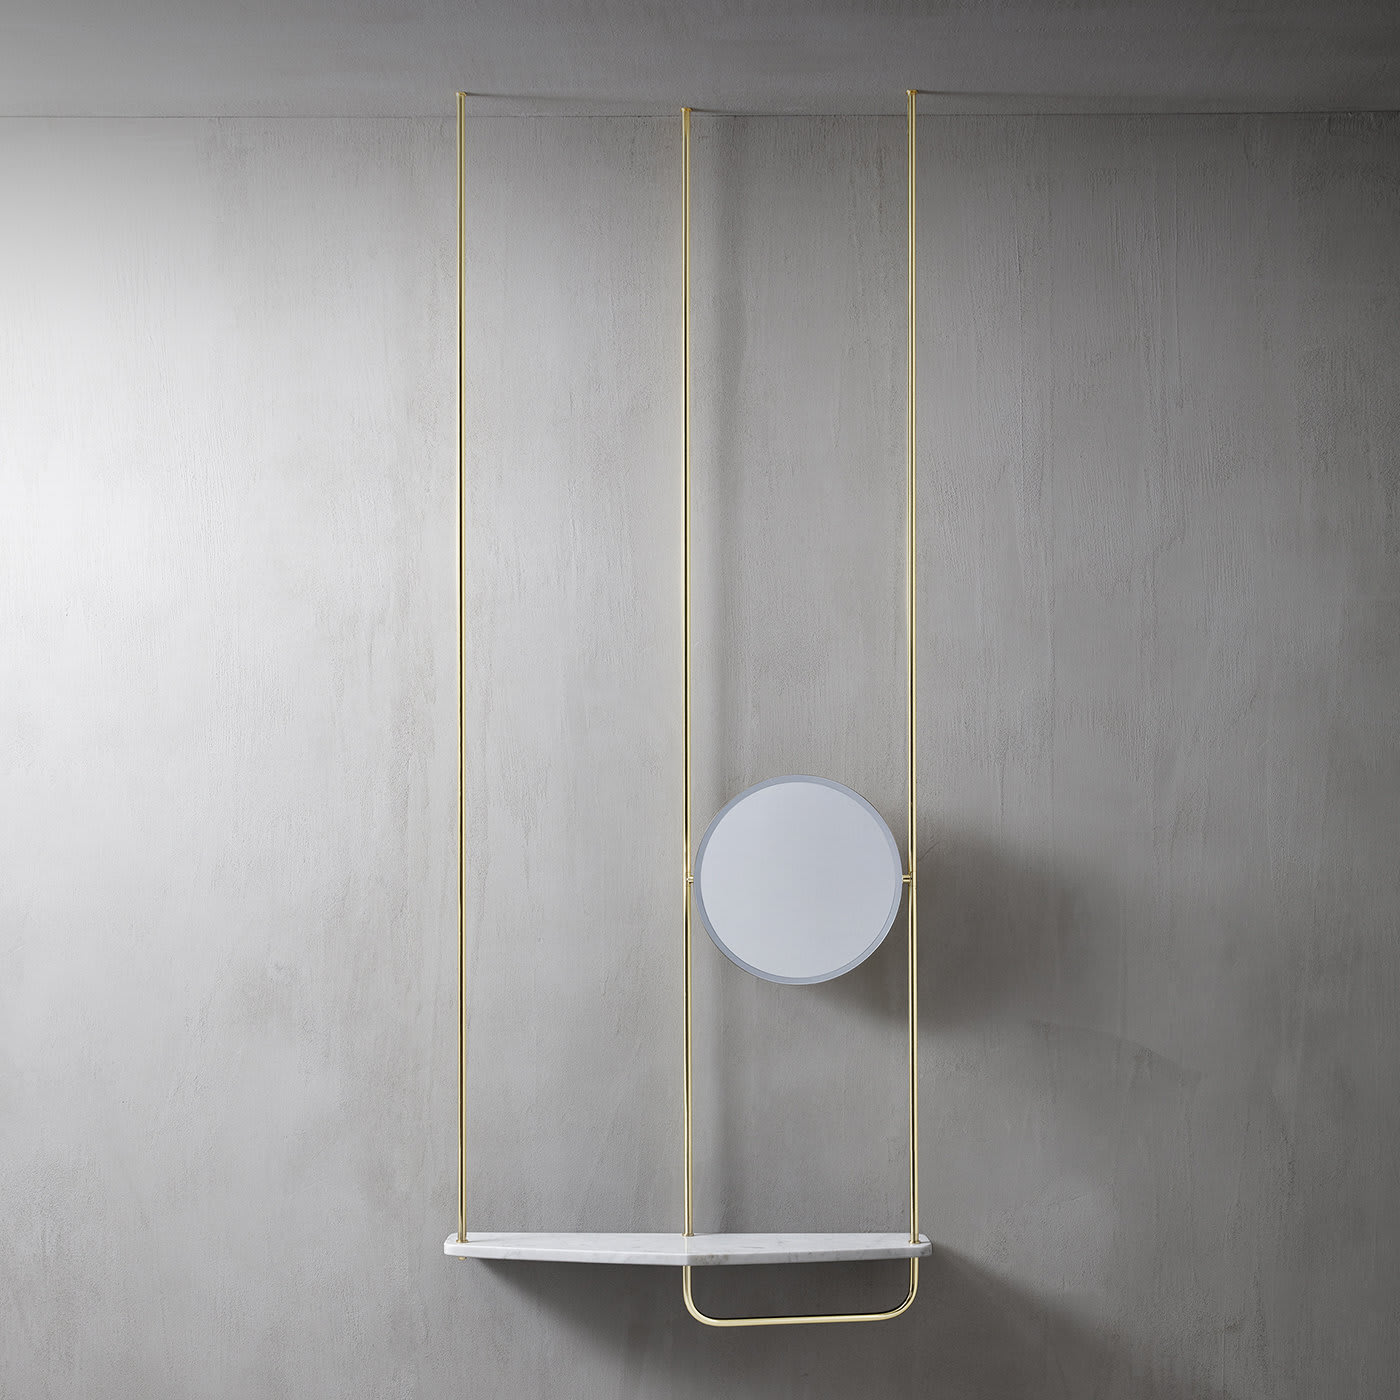 Make-up Hanging White Console by GoodMorning studio - Daythings